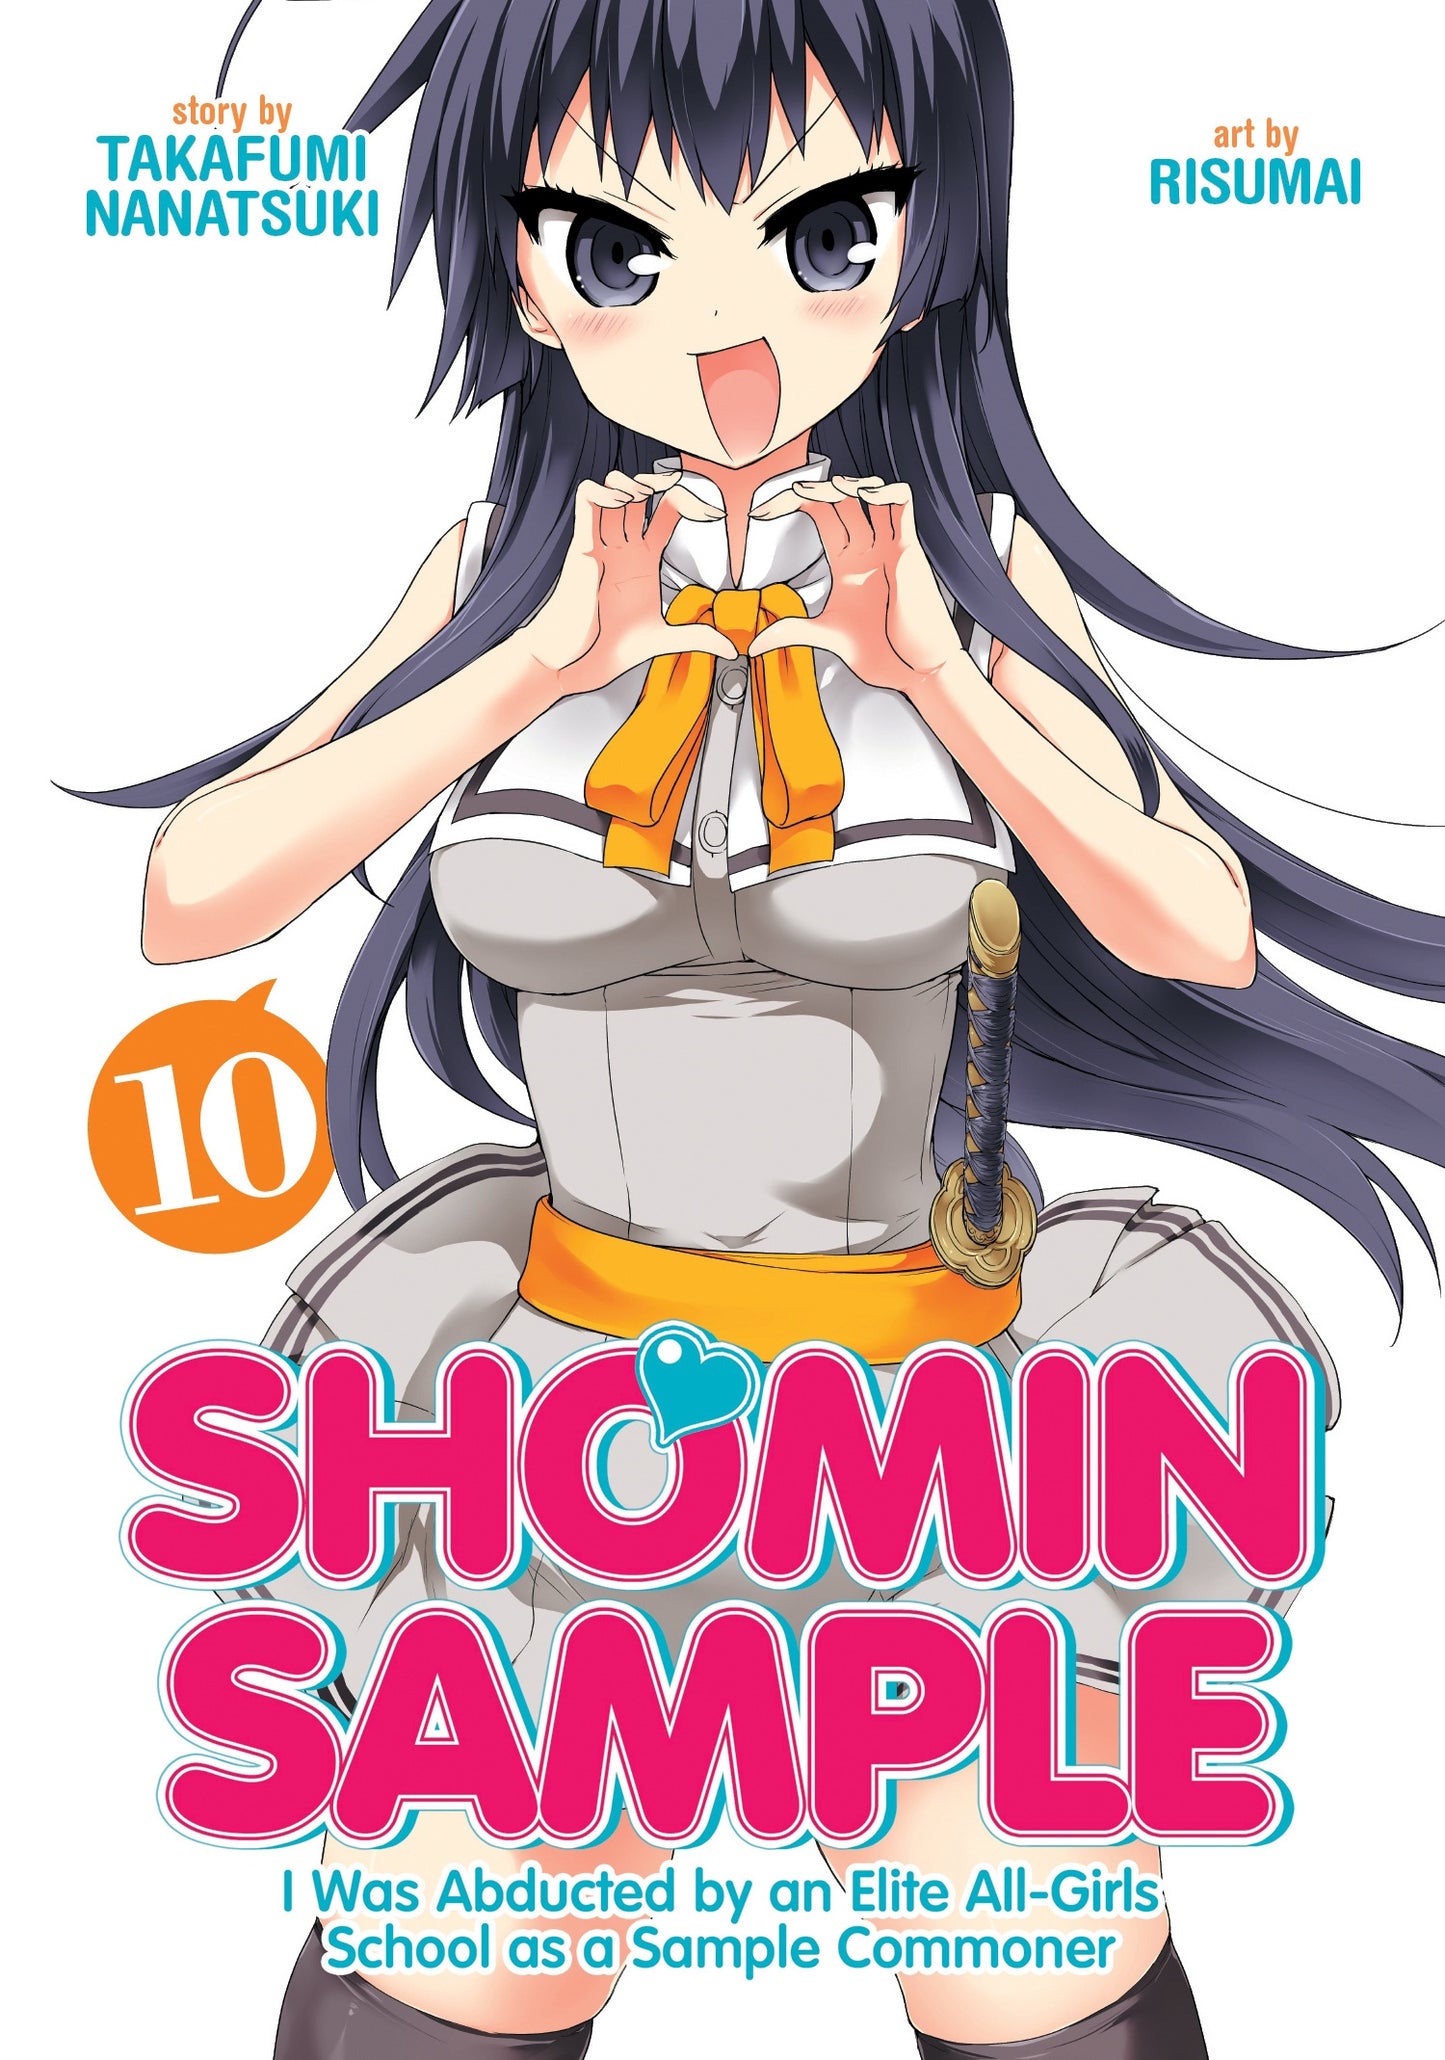 Shomin Sample : I Was Abducted by an Elite All-Girls School as a Sample Commoner Vol. 10 - Manga Warehouse